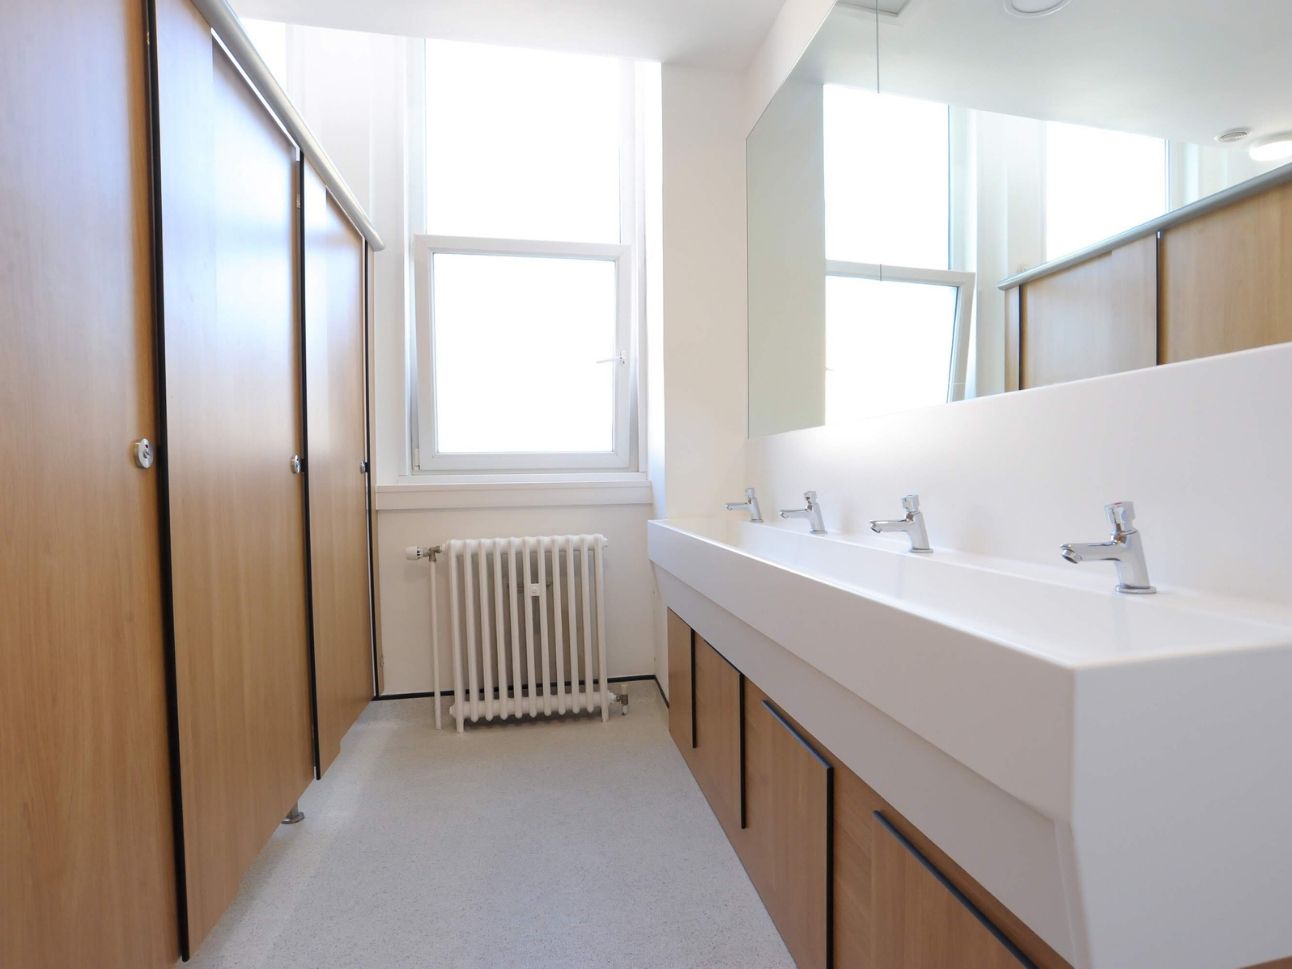 Global Charity's London HQ Renovation | Commercial Washrooms